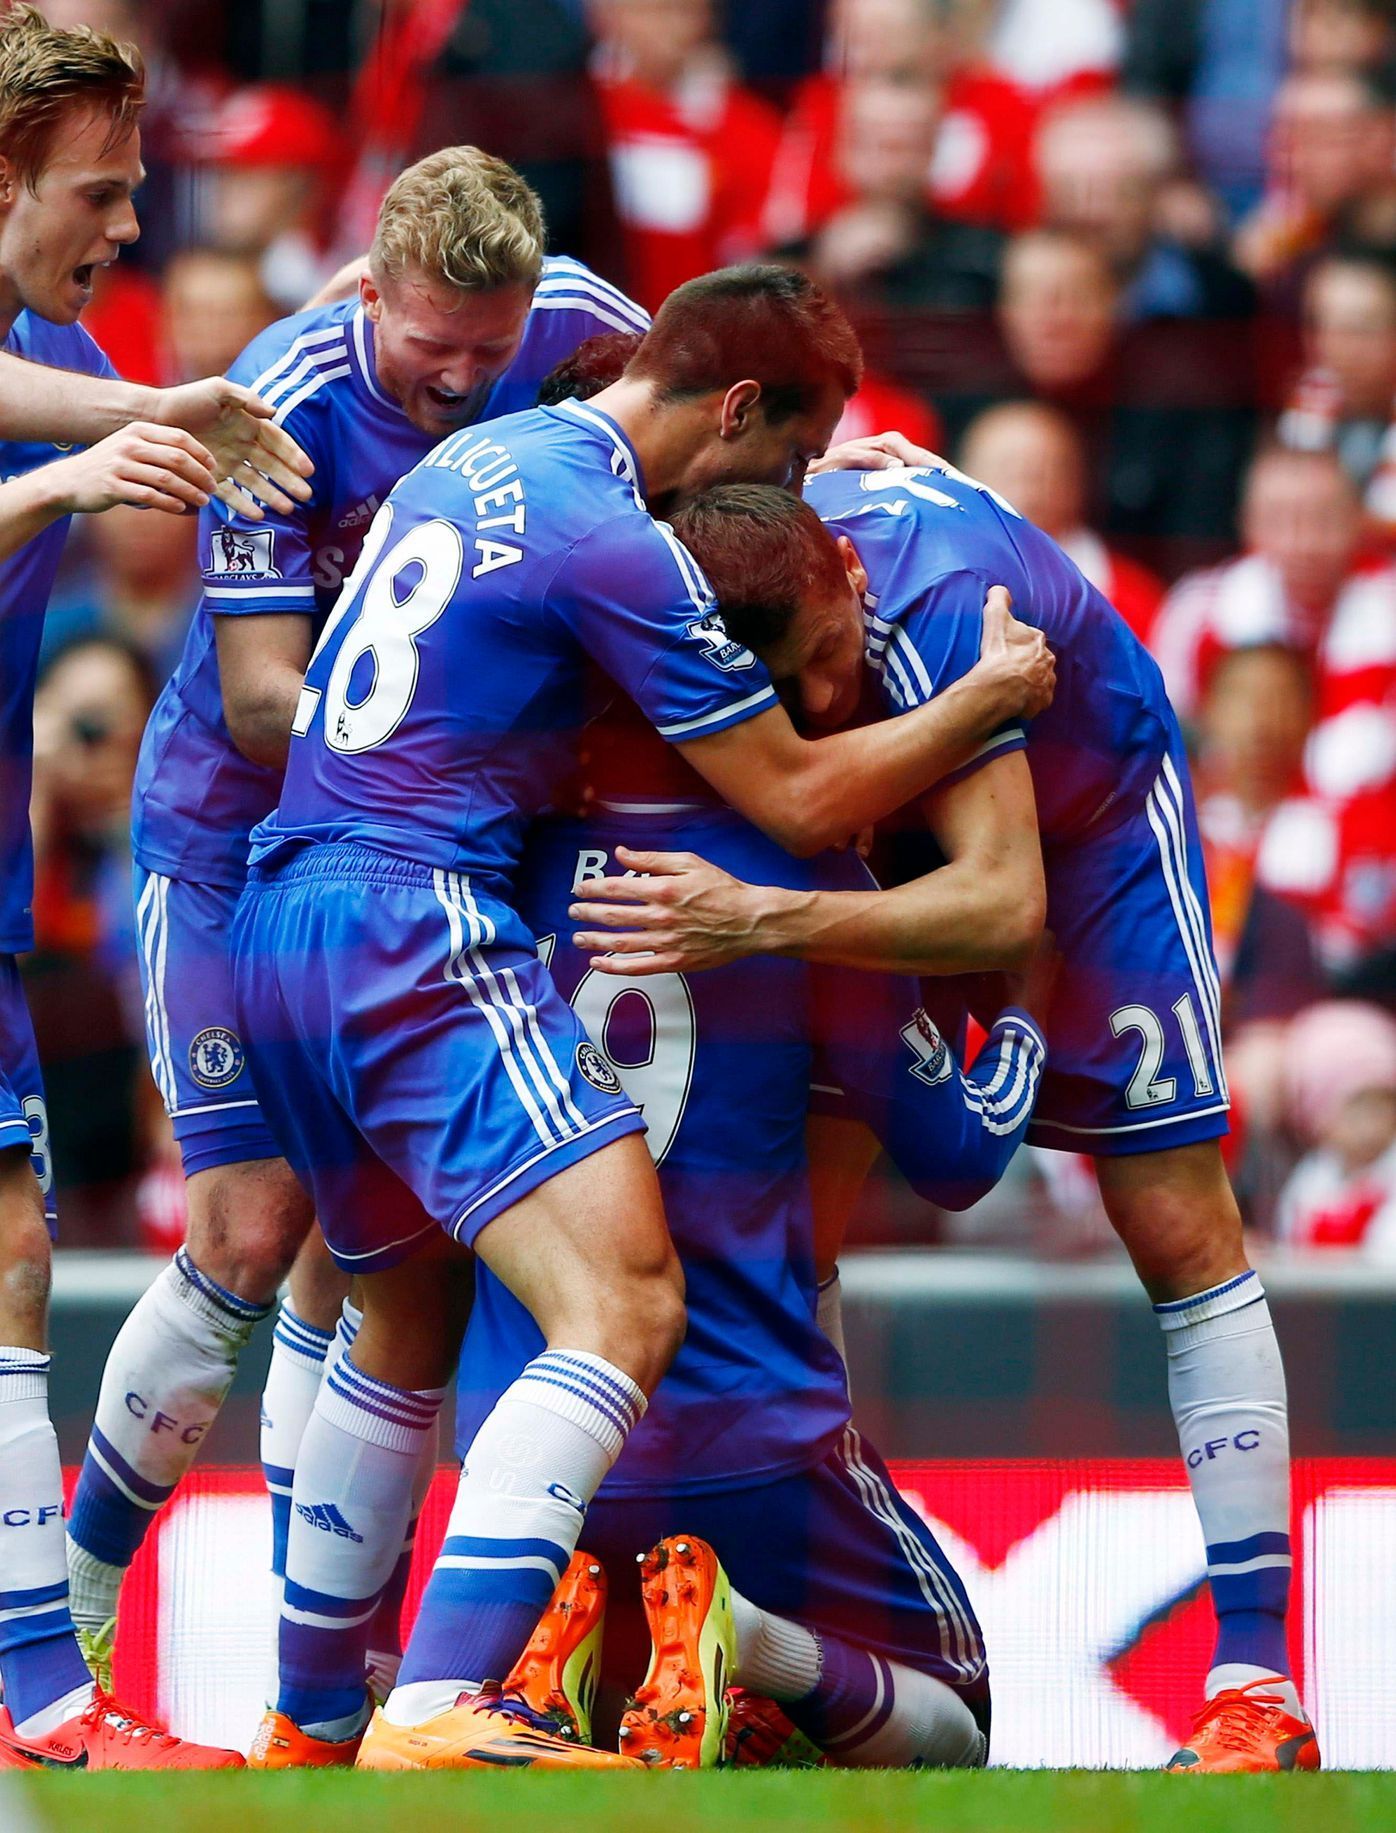 Chelsea's Ba celebrates with teammates after scoring a goal during their English Premier League soccer match against Liverpool at Anfield in Liverpool